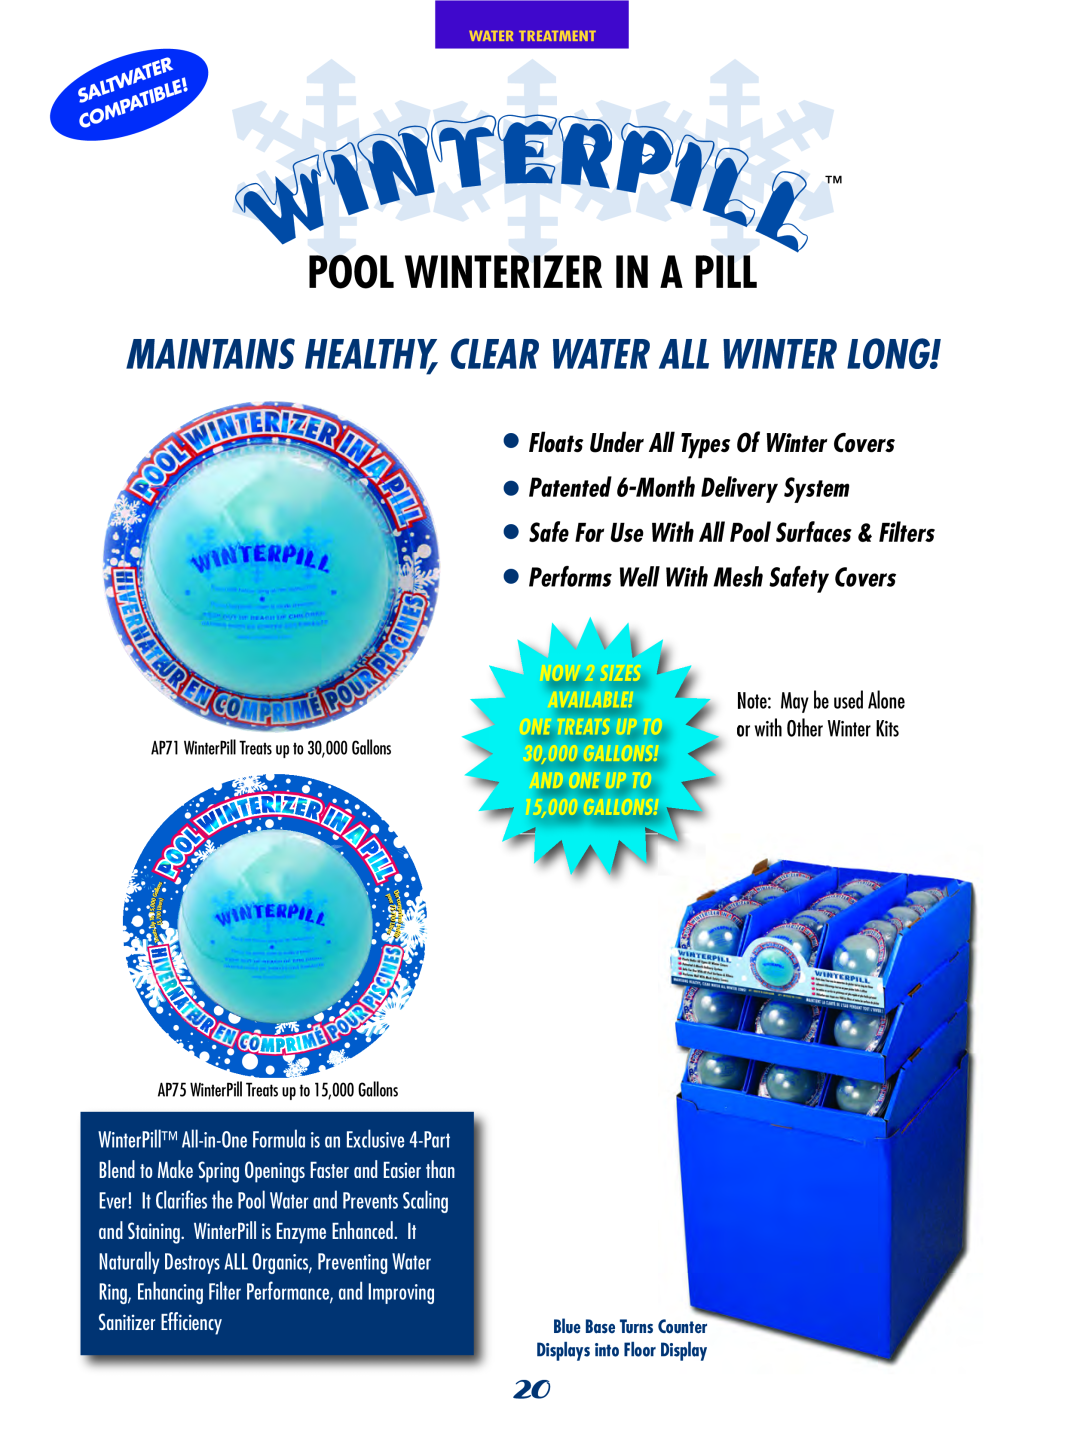 SmartPool Inc NC31 Pool Winterizer In A Pill, Maintains Healthy, Clear Water All Winter Long, Blue Base Turns Counter 